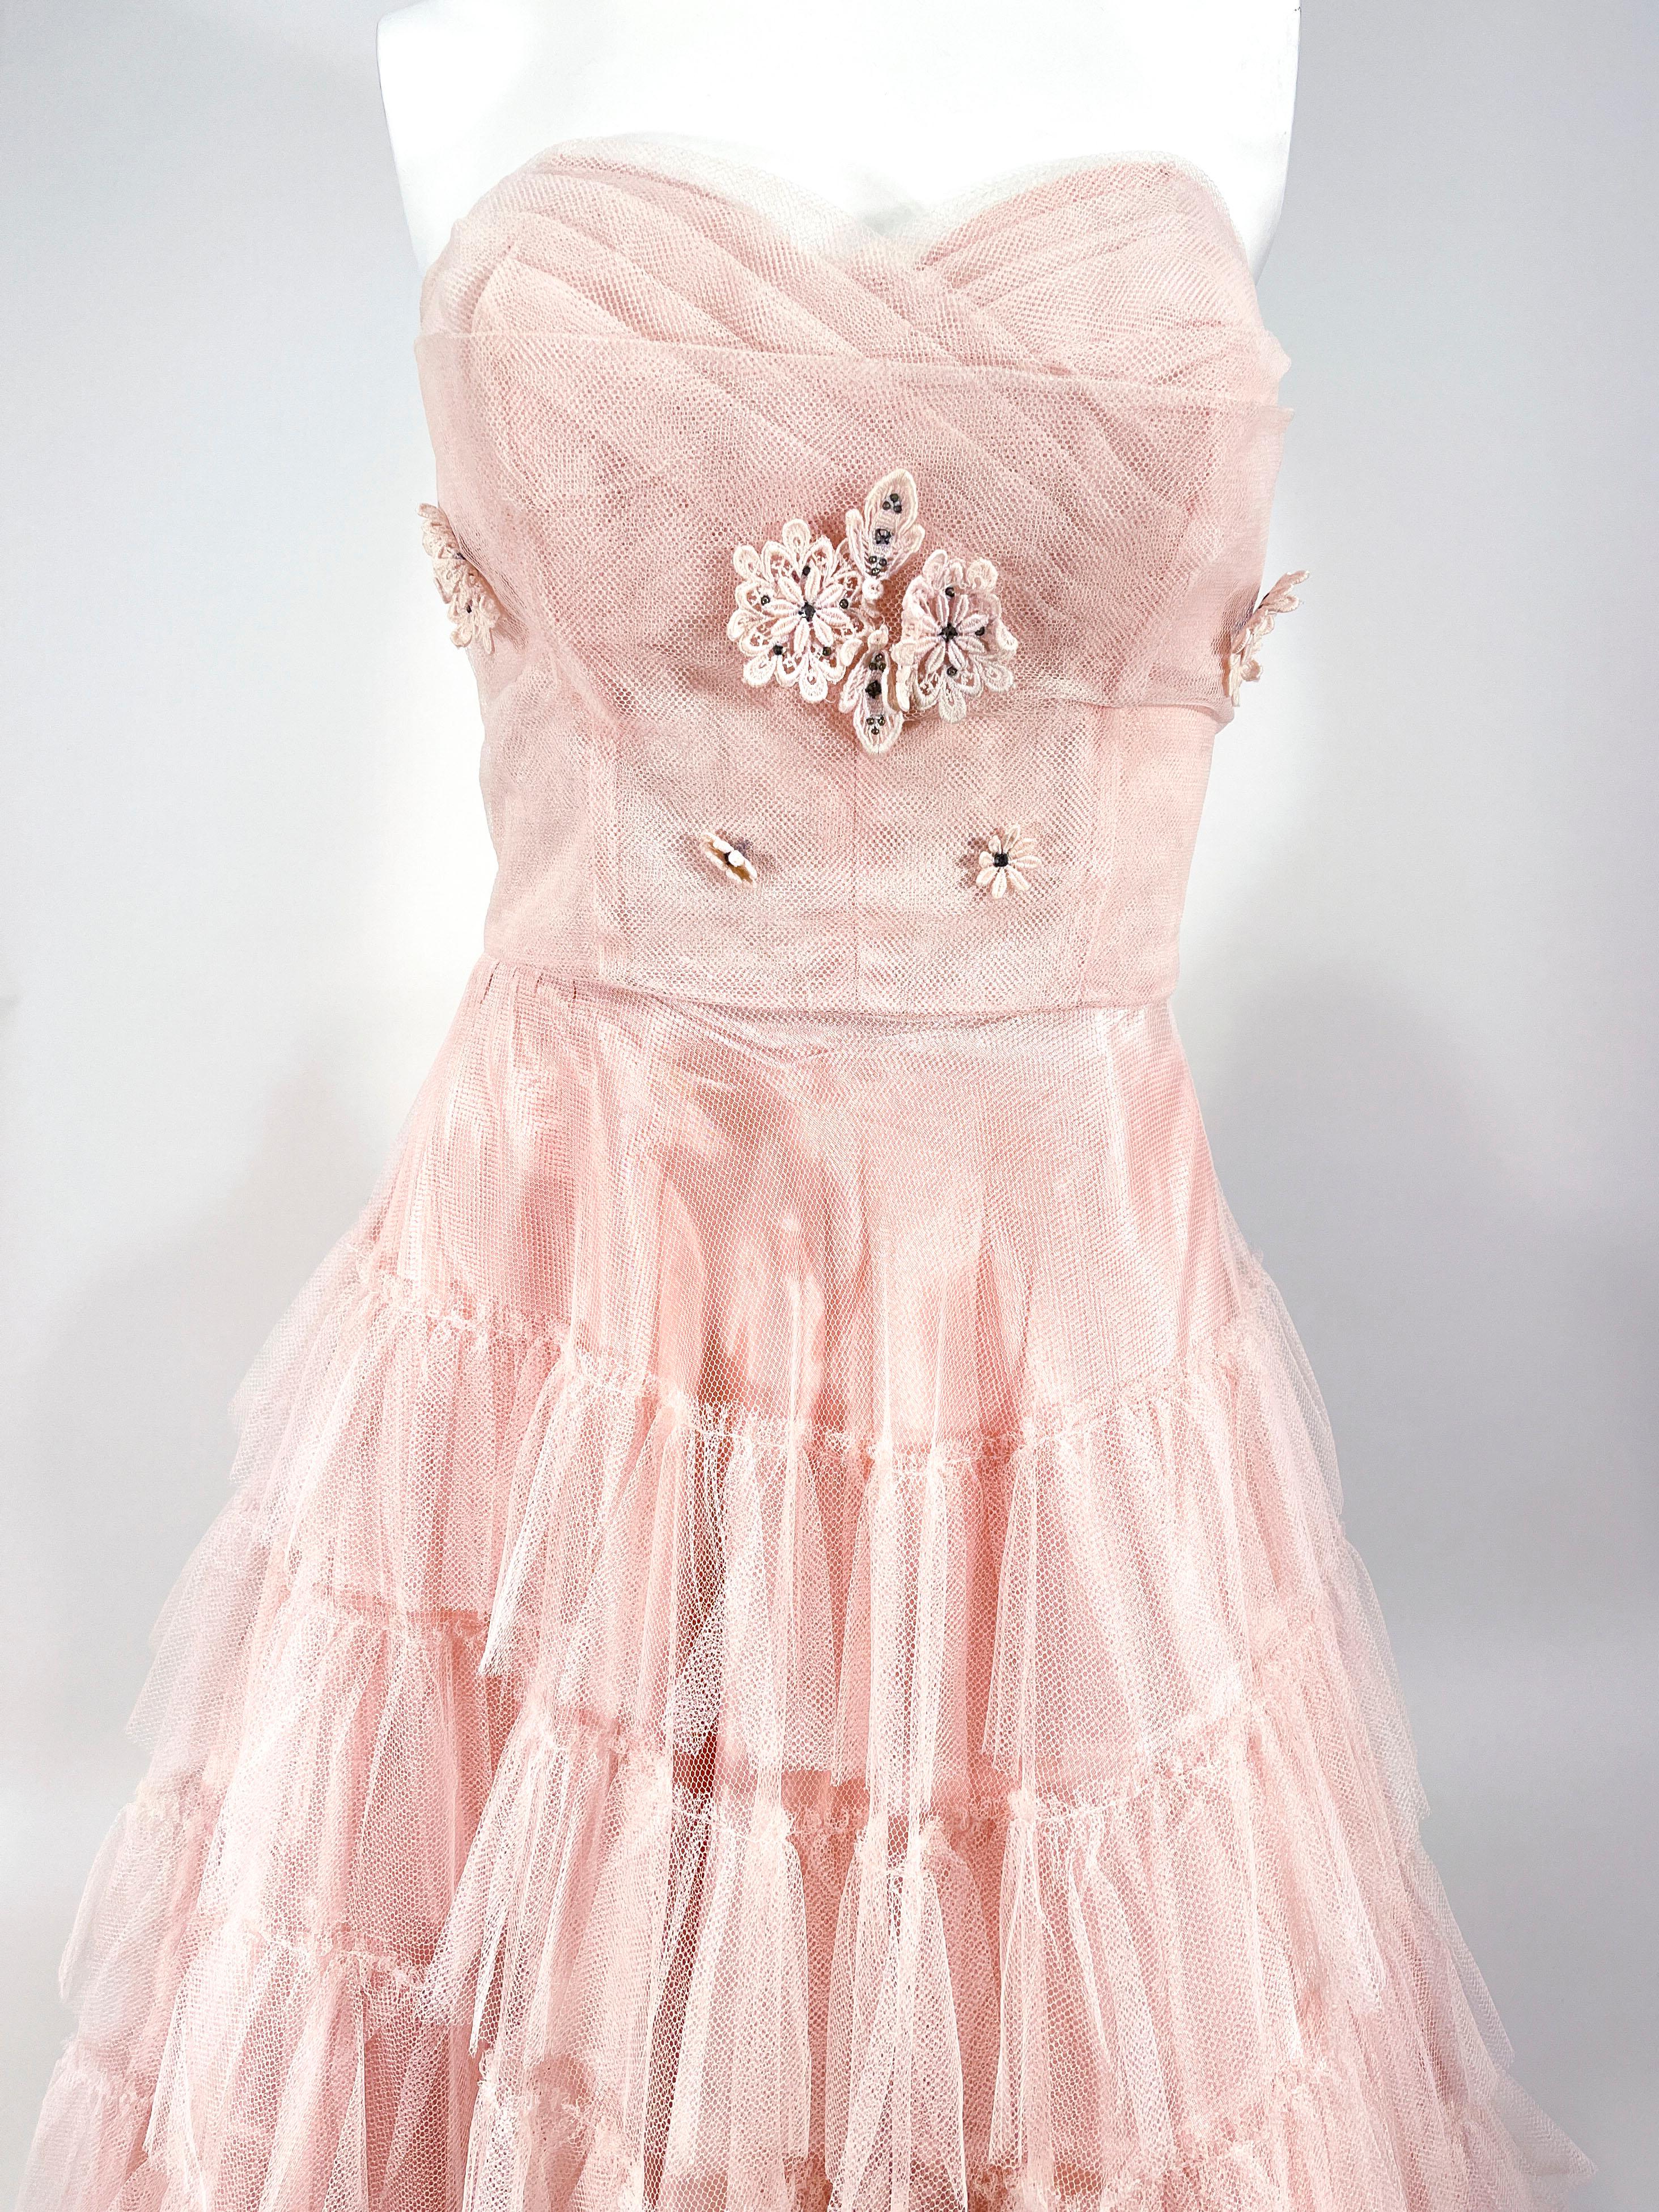 1950s pink tulle party dress featuring a sleeveless bodice decorated with pleated tule and pink appliqué with added rhinestones. The full skirt has multiple layers of ruffled tulle that go down to a tea length. This dress is fully lined in taffeta